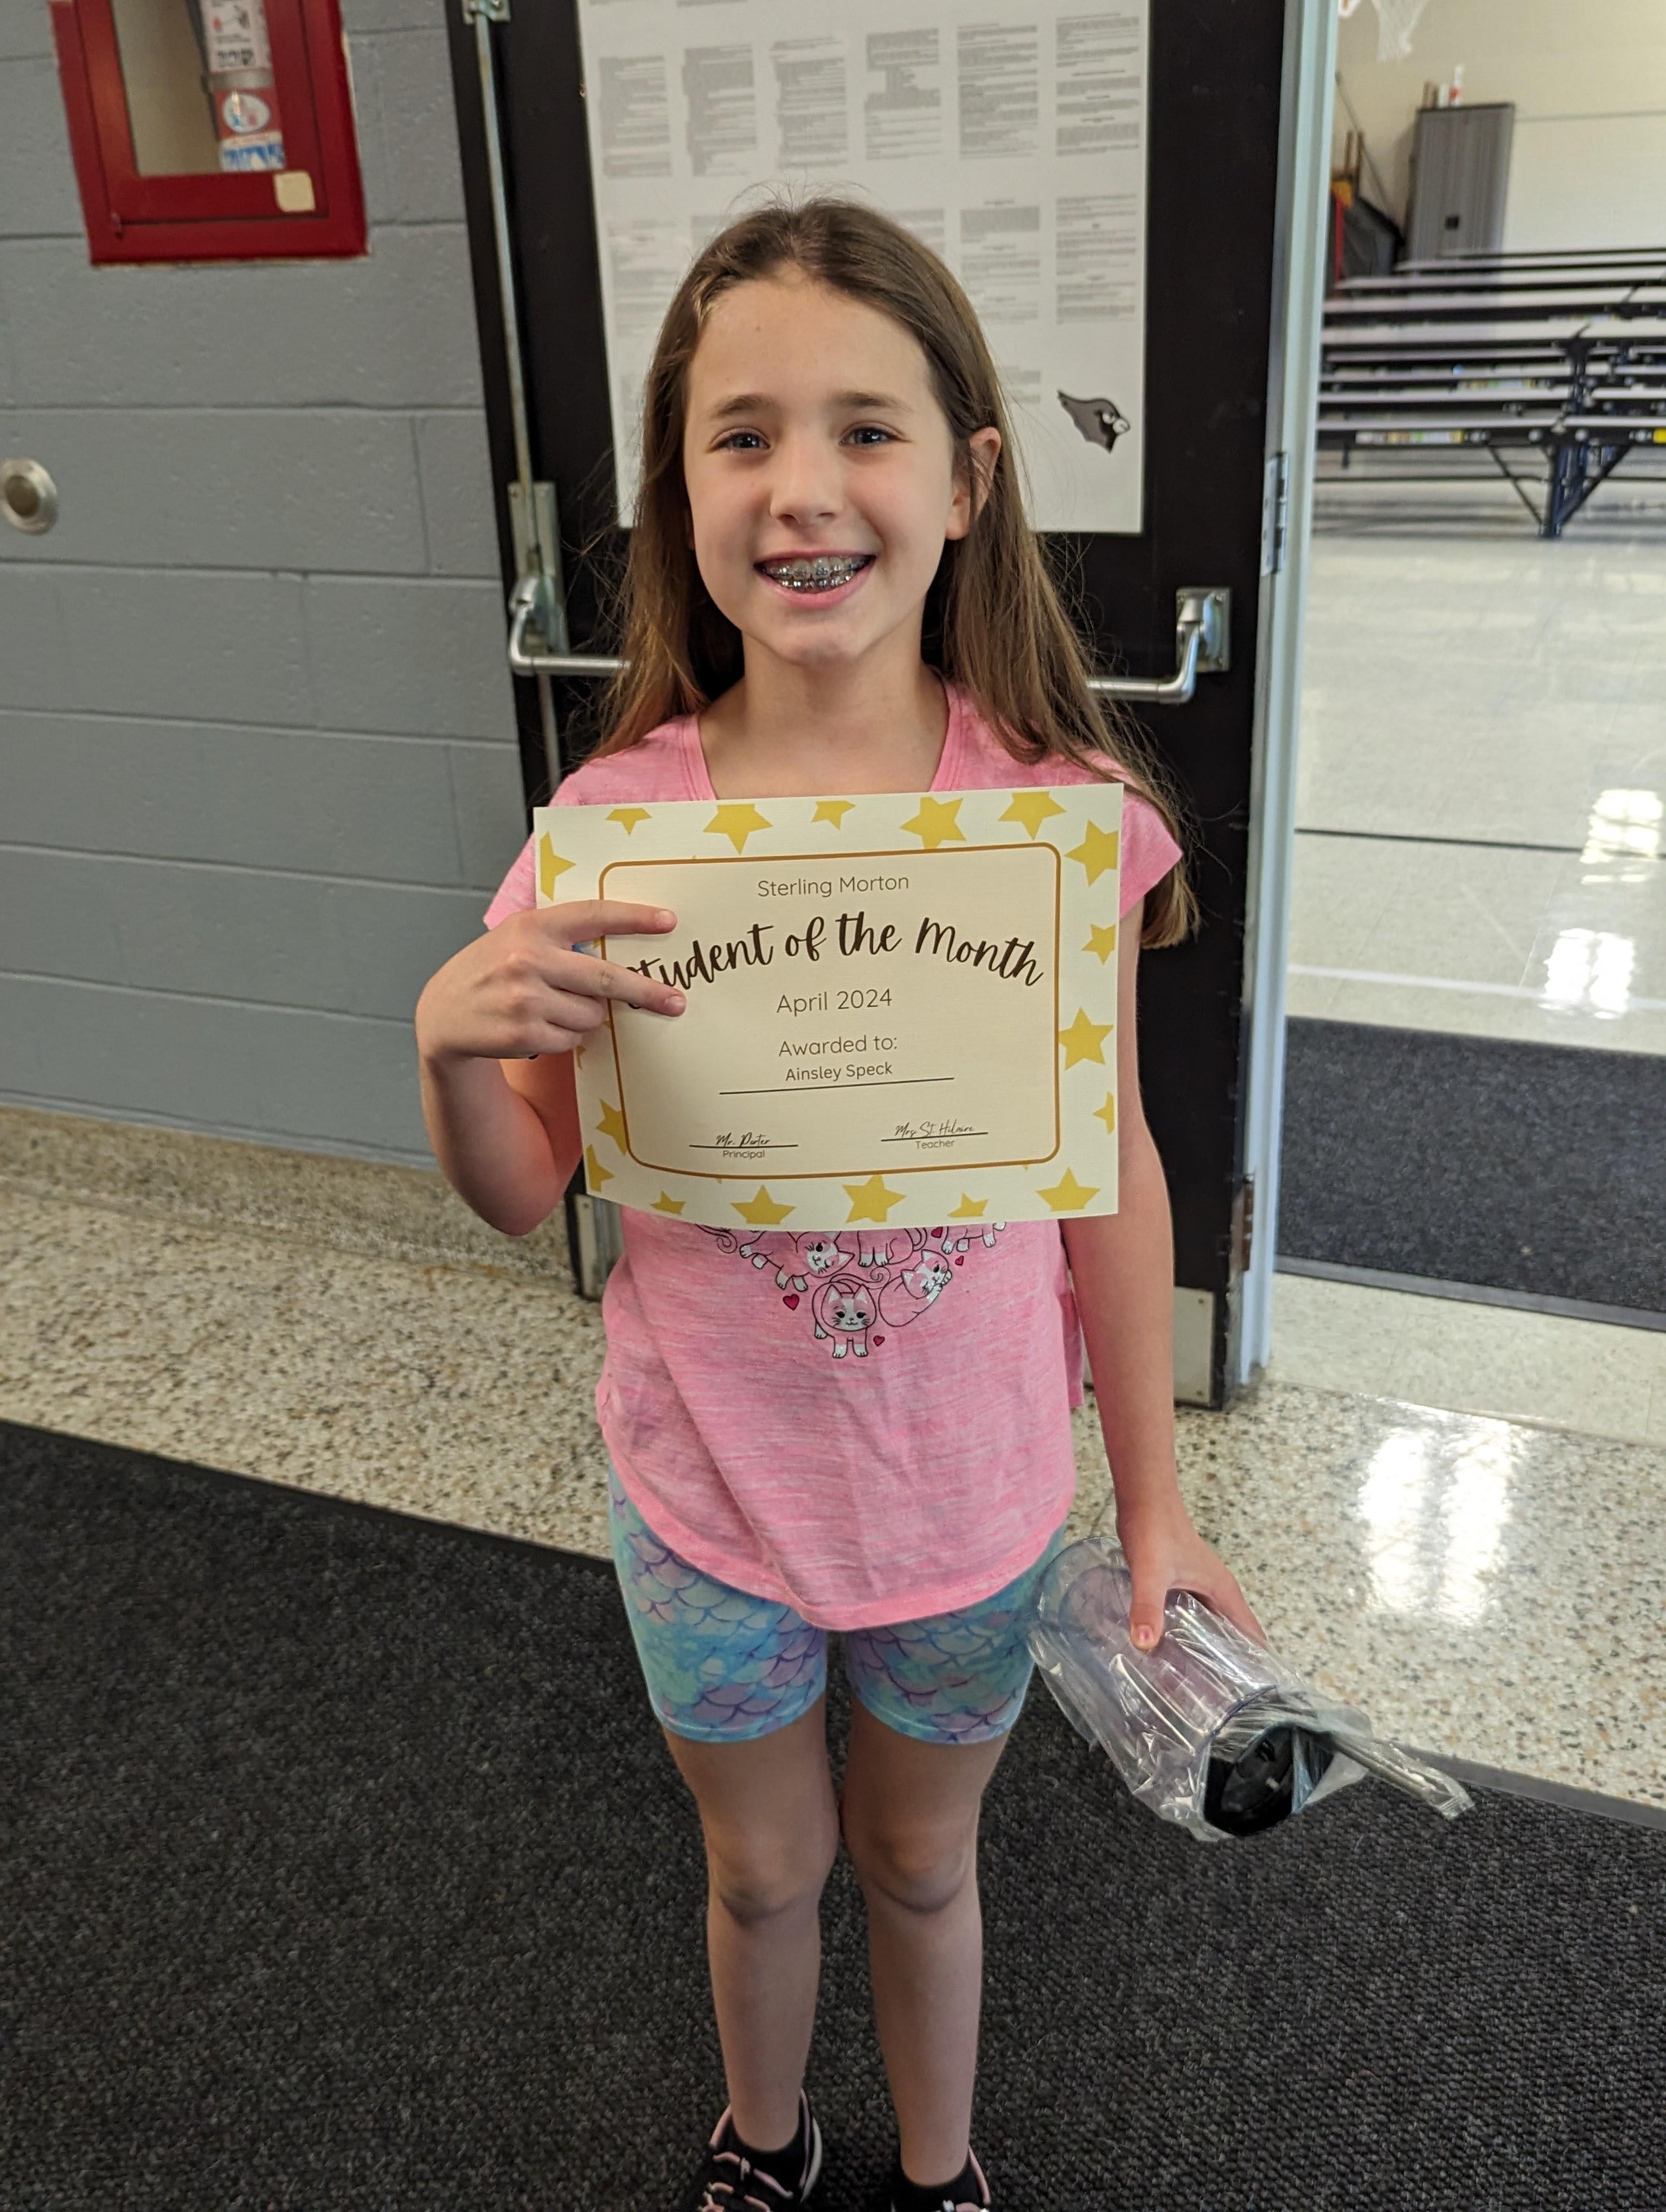 Girl student of the month